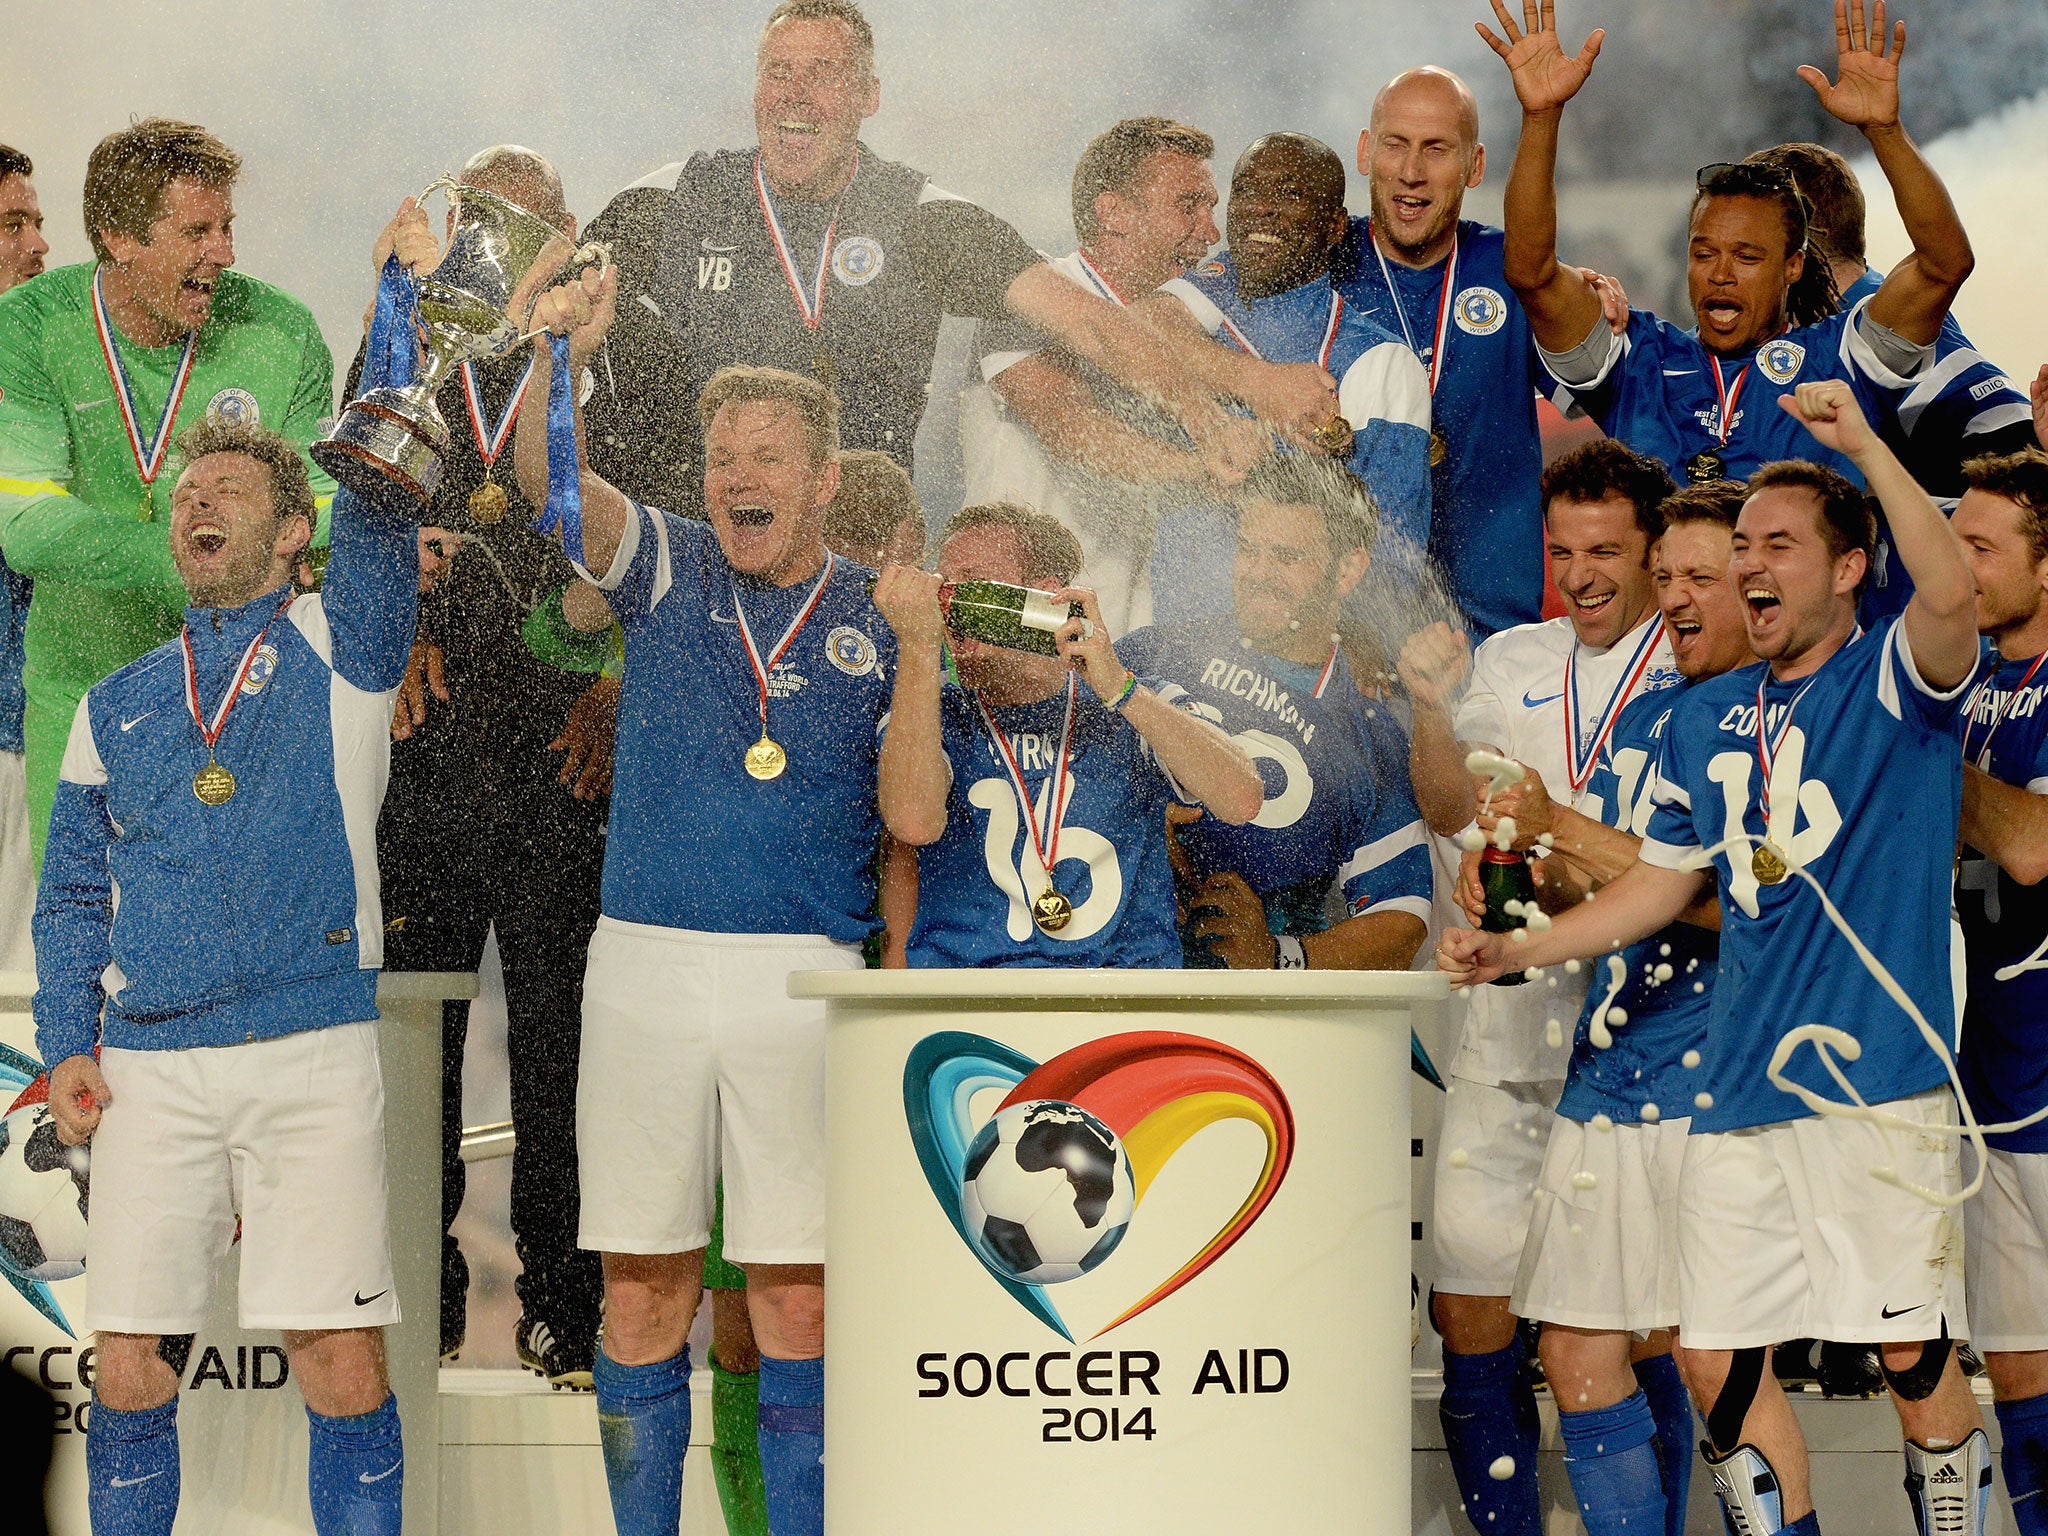 Michael Sheen and Gordon Ramsay of the Rest of the World lift the trophy as they celebrate with team mates victory in the Soccer Aid 2014 match at Old Trafford